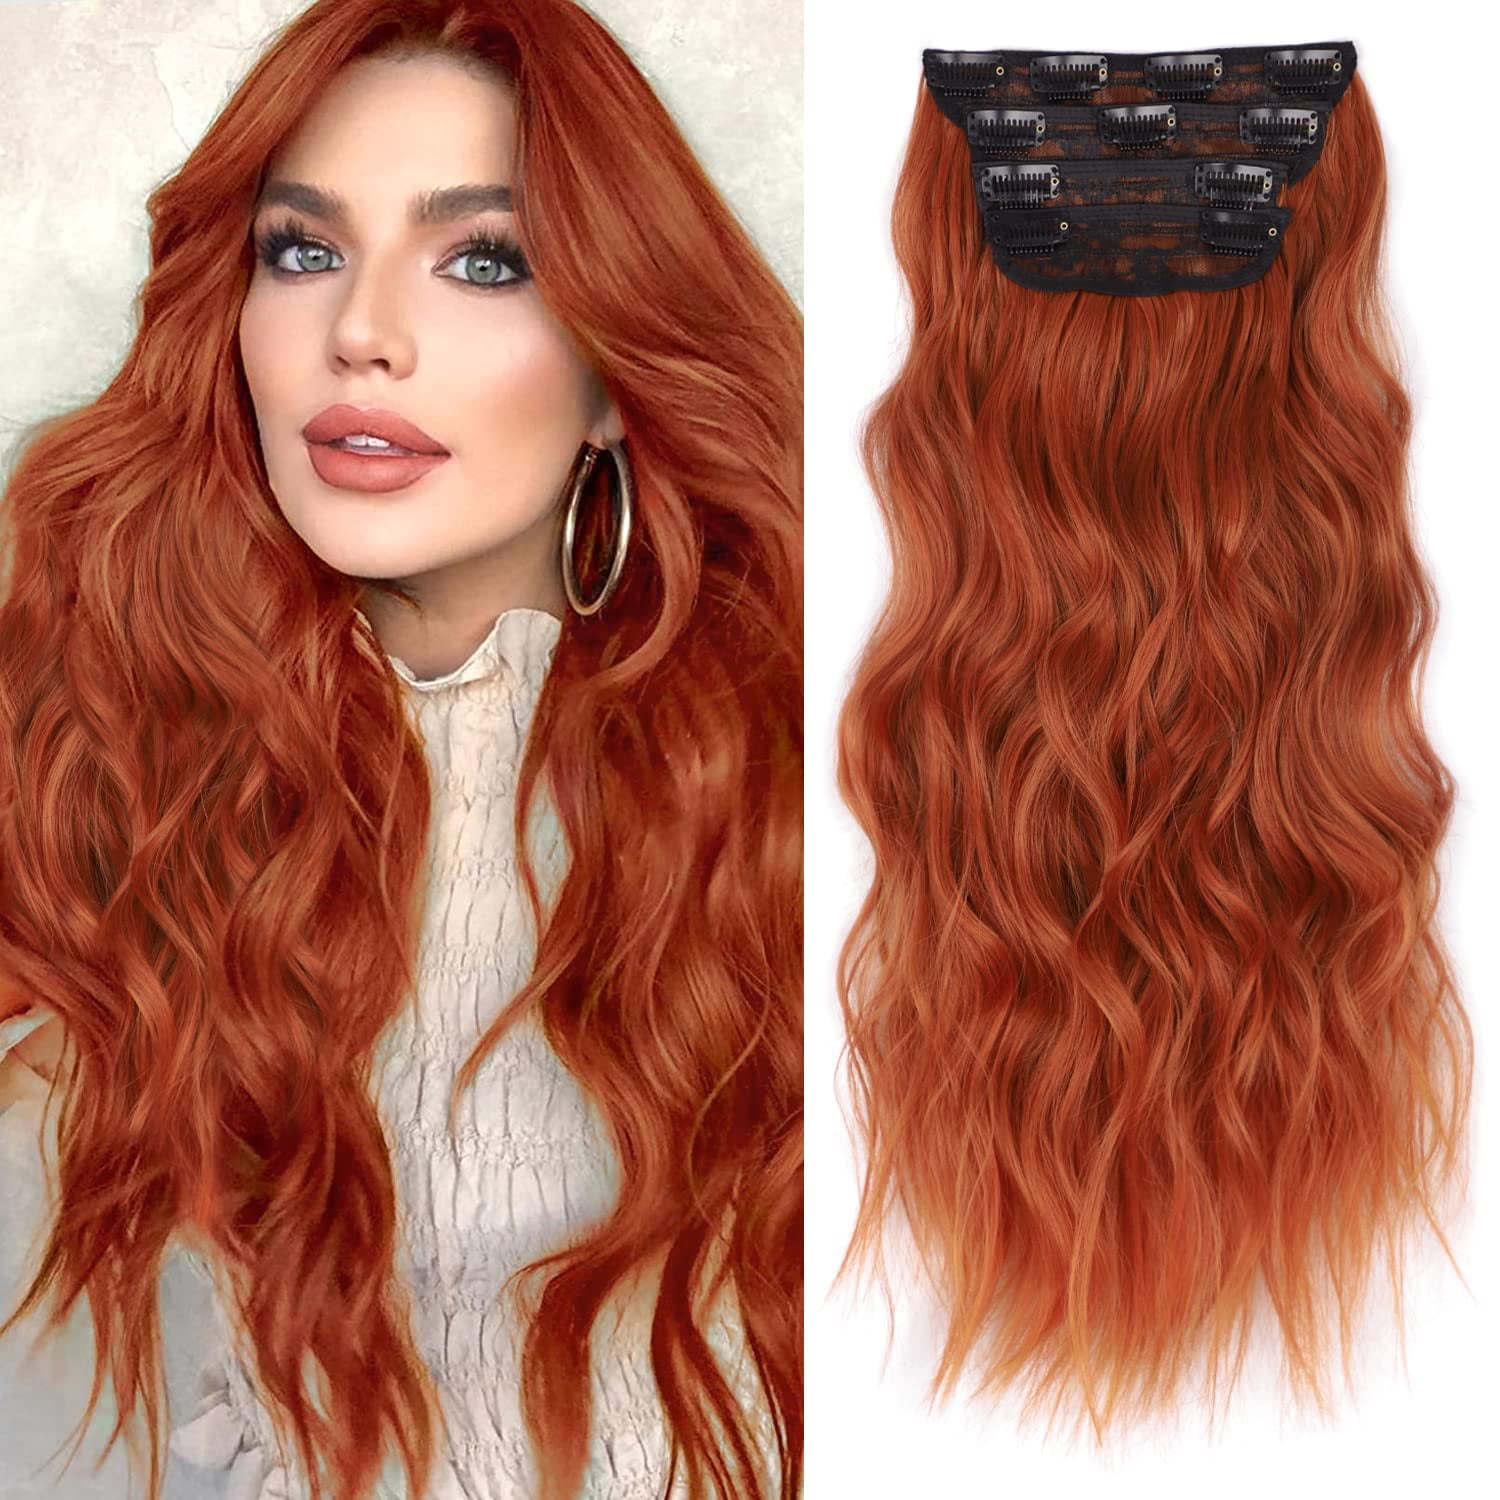 Long Hair Extensions in Red